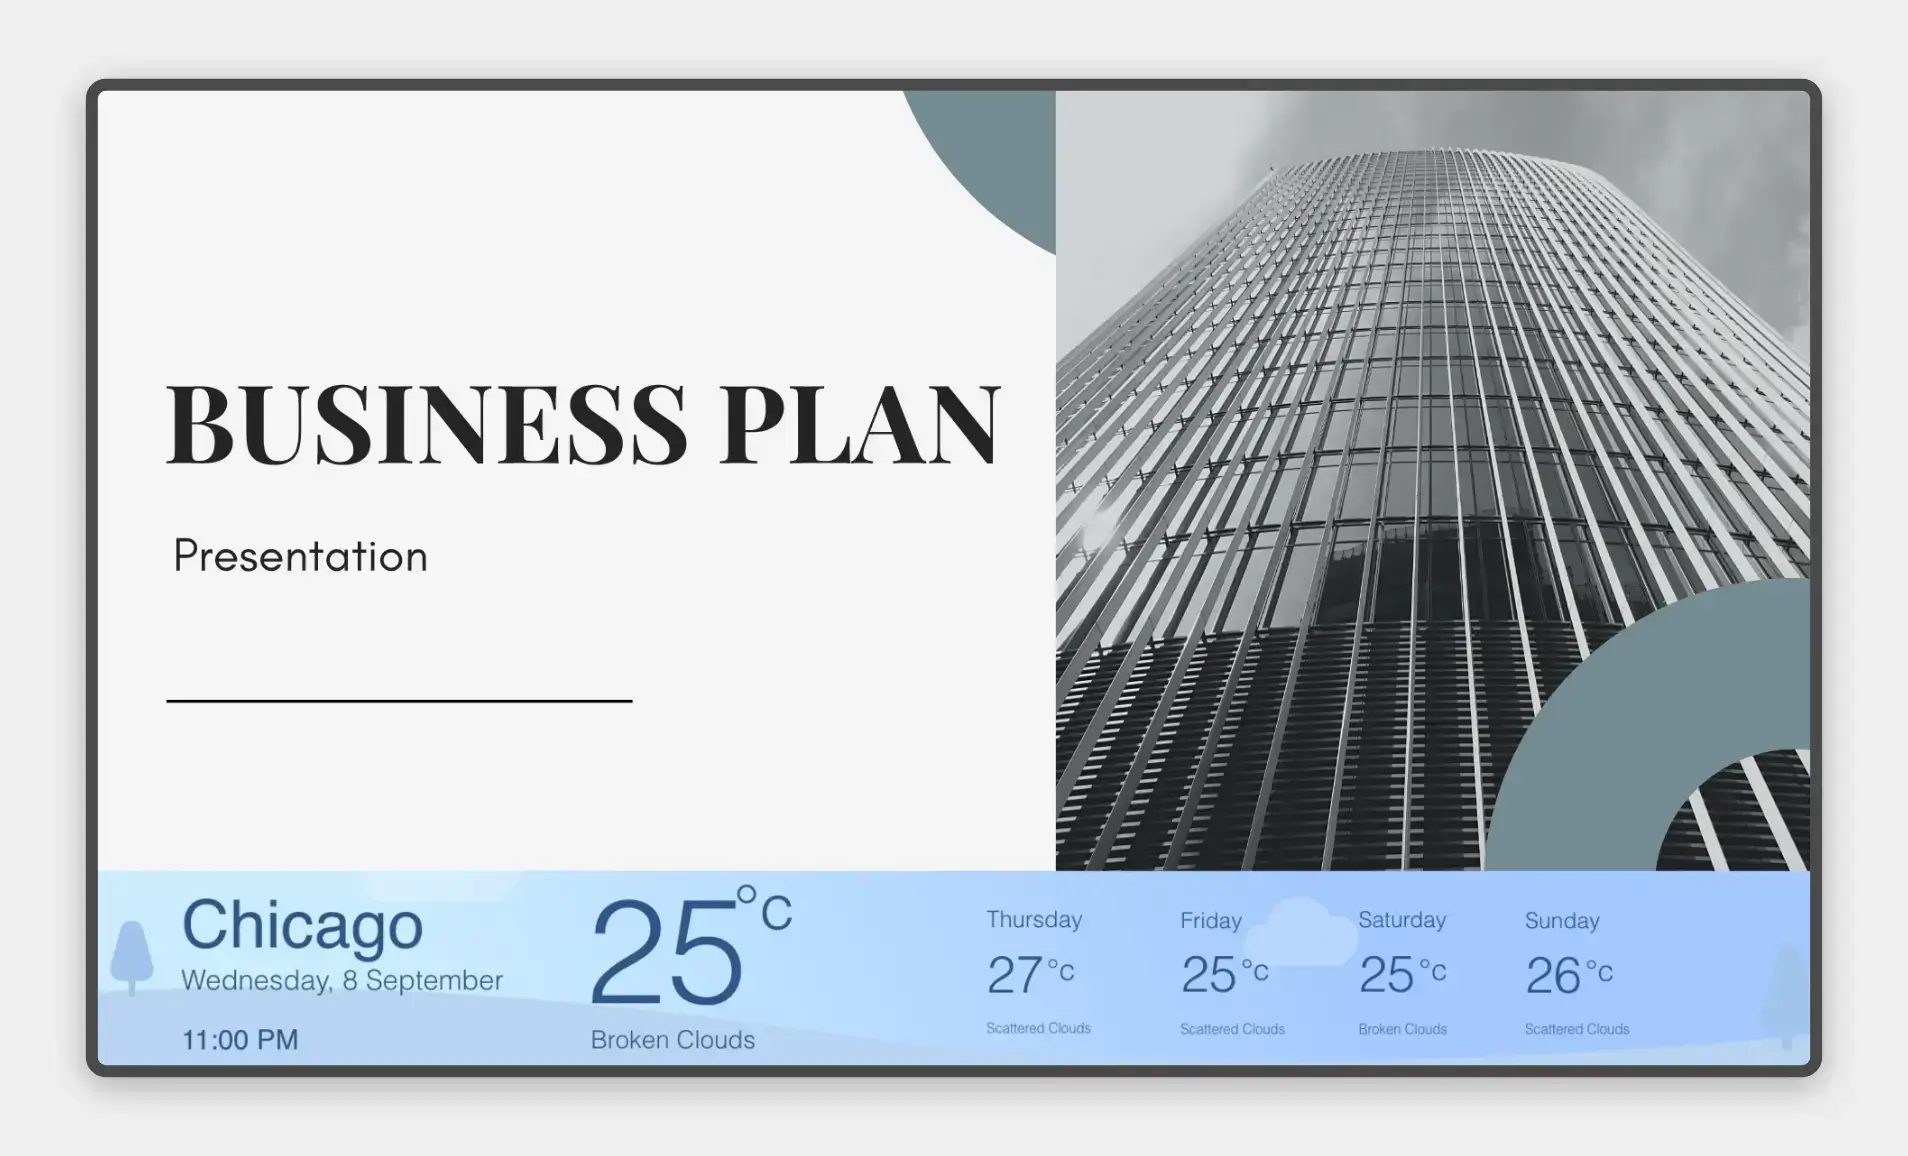 Digital signage displaying simultaneous contents from Google Slides app and Weather app.